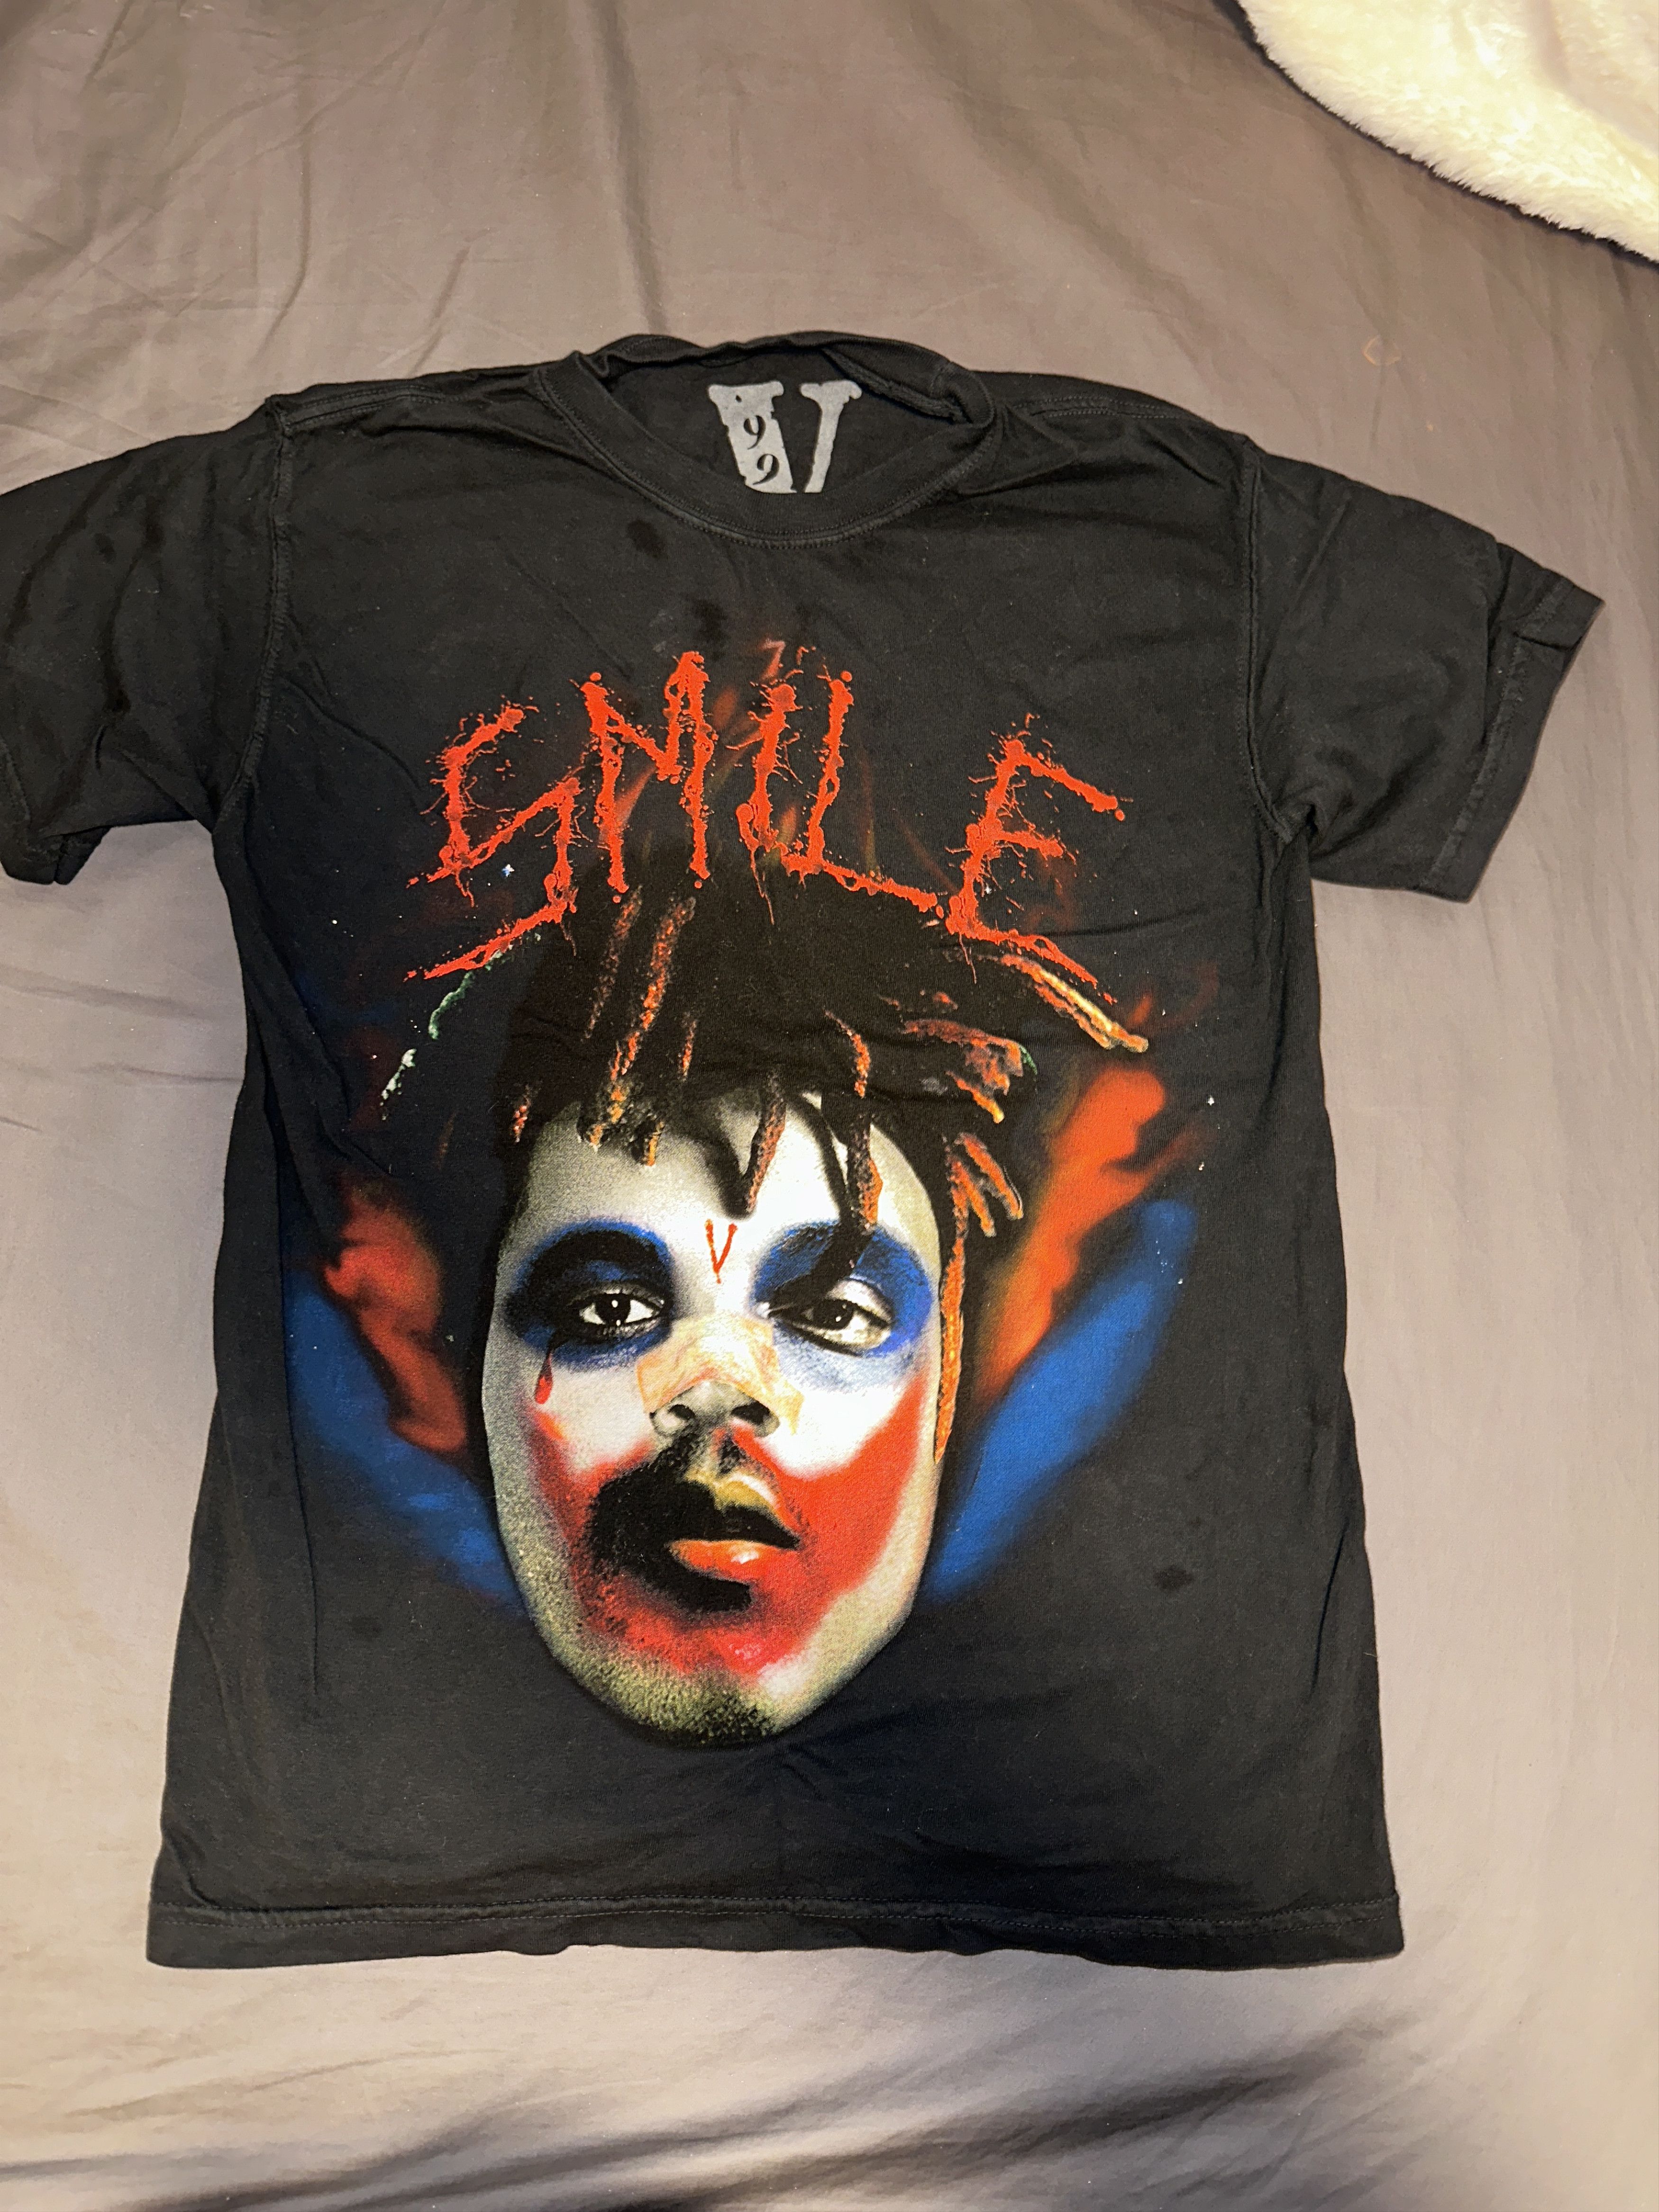 Vlone Juice Wrld x Weekend “Smile” Clown V-Lone Tee Size US S / EU 44-46 / 1 - 1 Preview